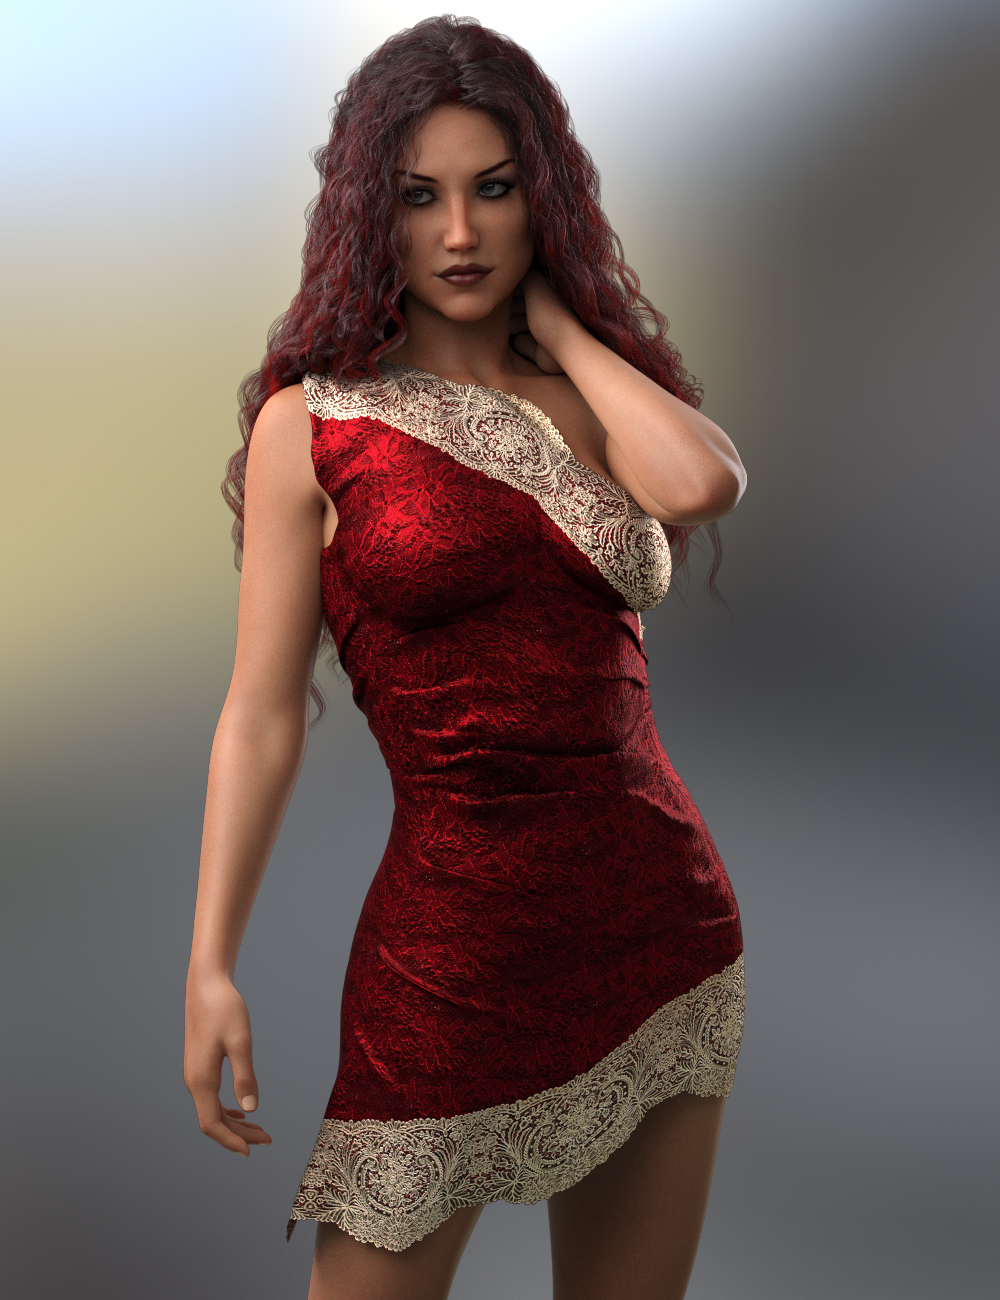 Camilla for Aubrey 8 by: 3DSublimeProductionsVex, 3D Models by Daz 3D